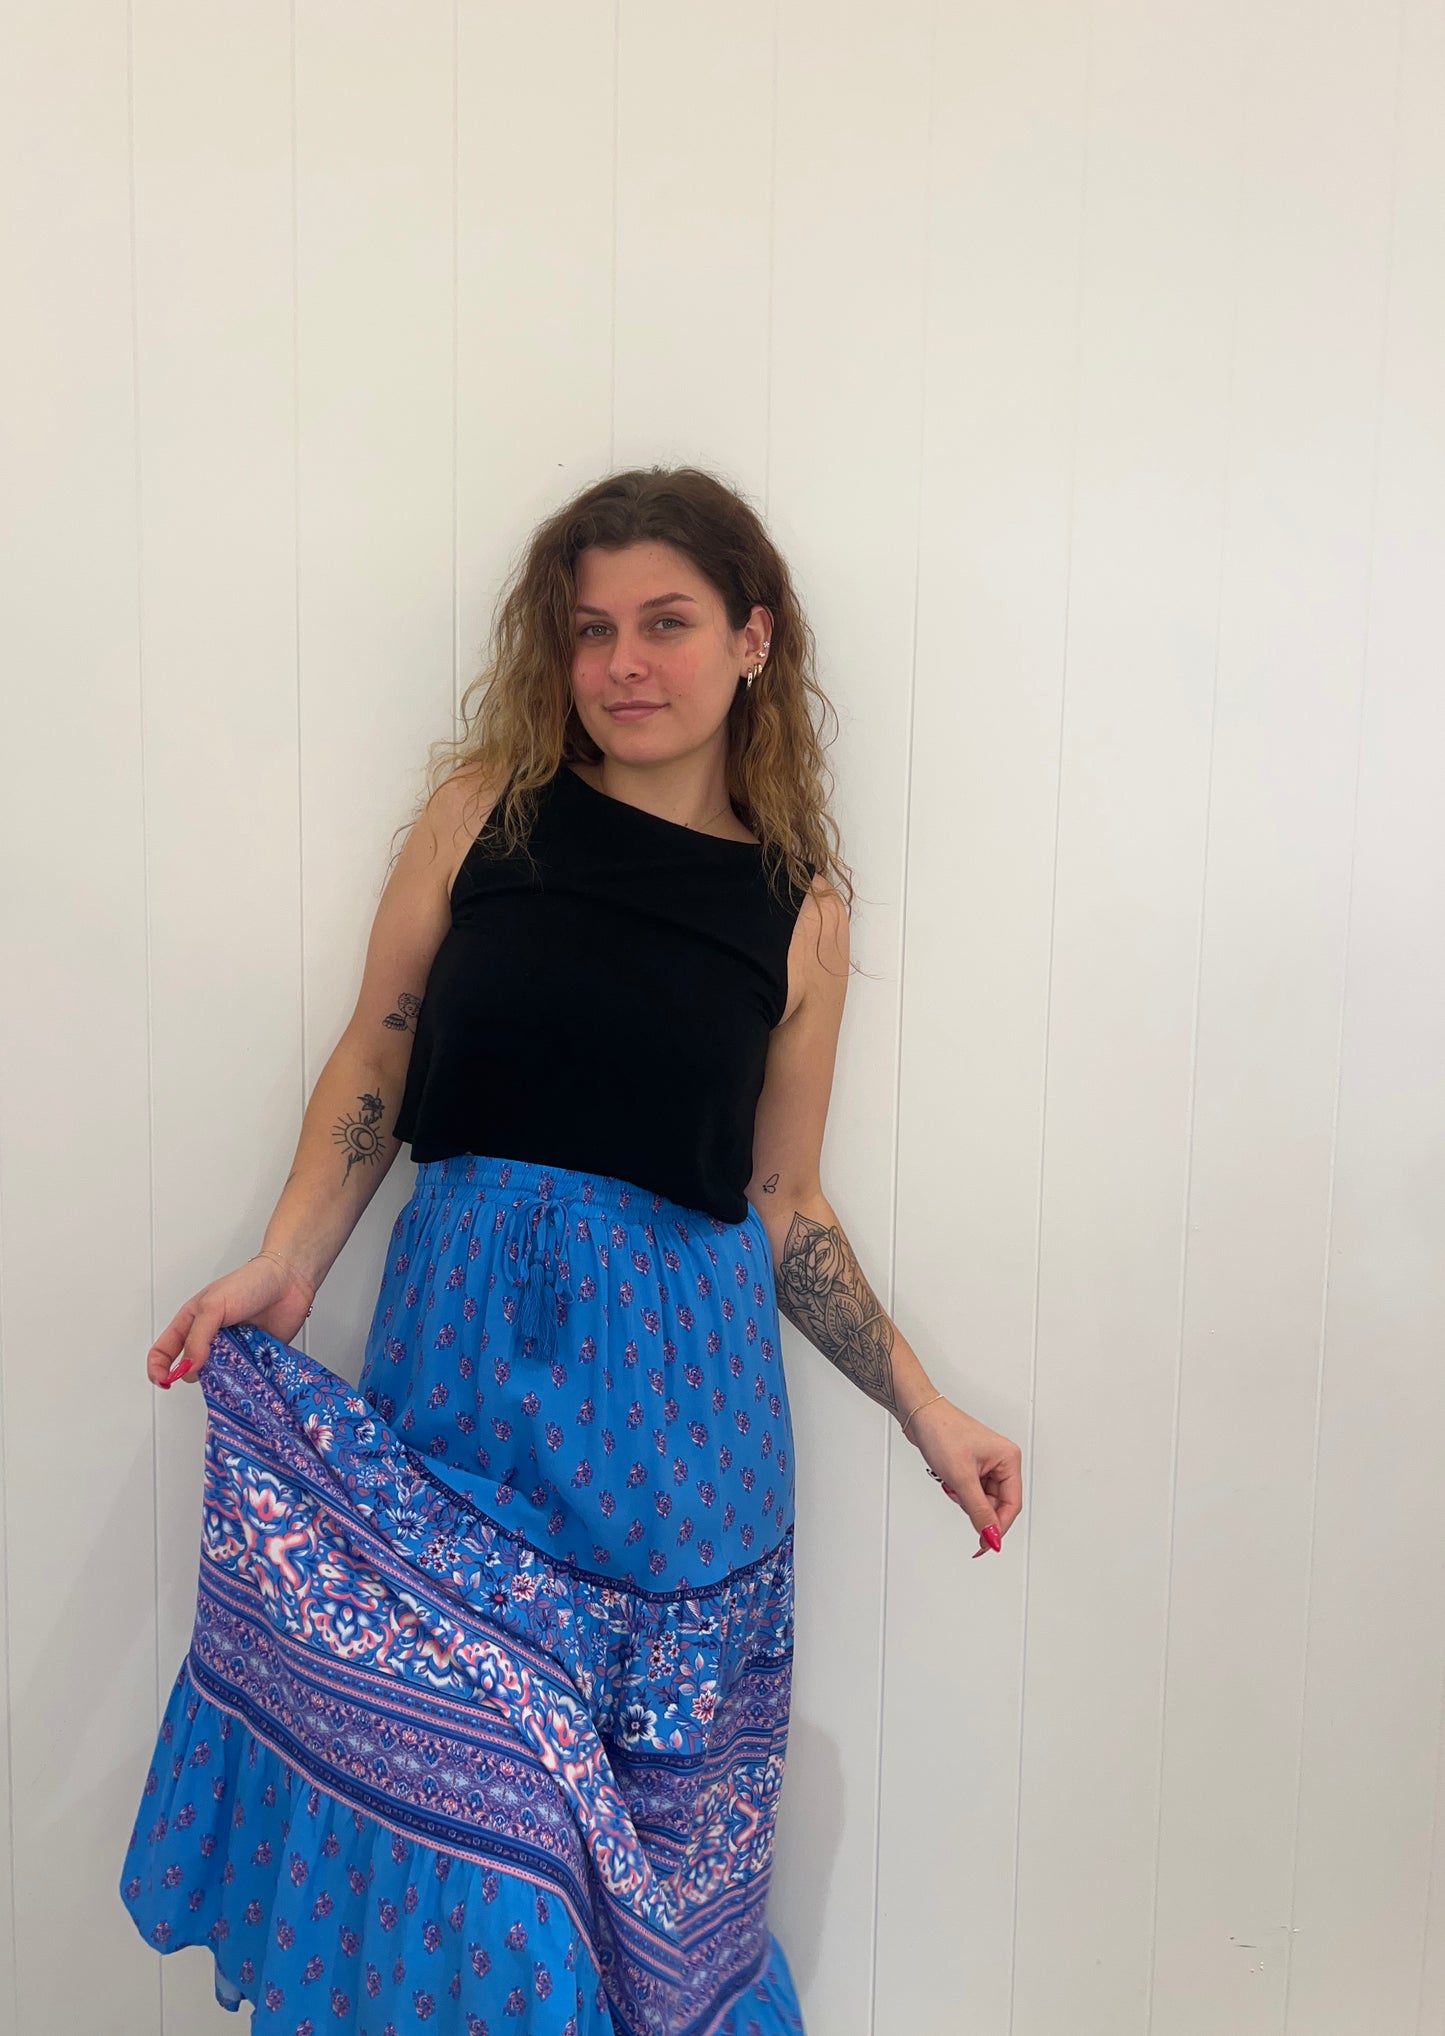 Step out in style in the Abigail Maxi Skirt. With elegant, tassel detailing, and a luxurious floral print, this stunning skirt features an elasticated waist and drawstring for a perfect fit, so you can feel comfortable yet oh-so-stylish.